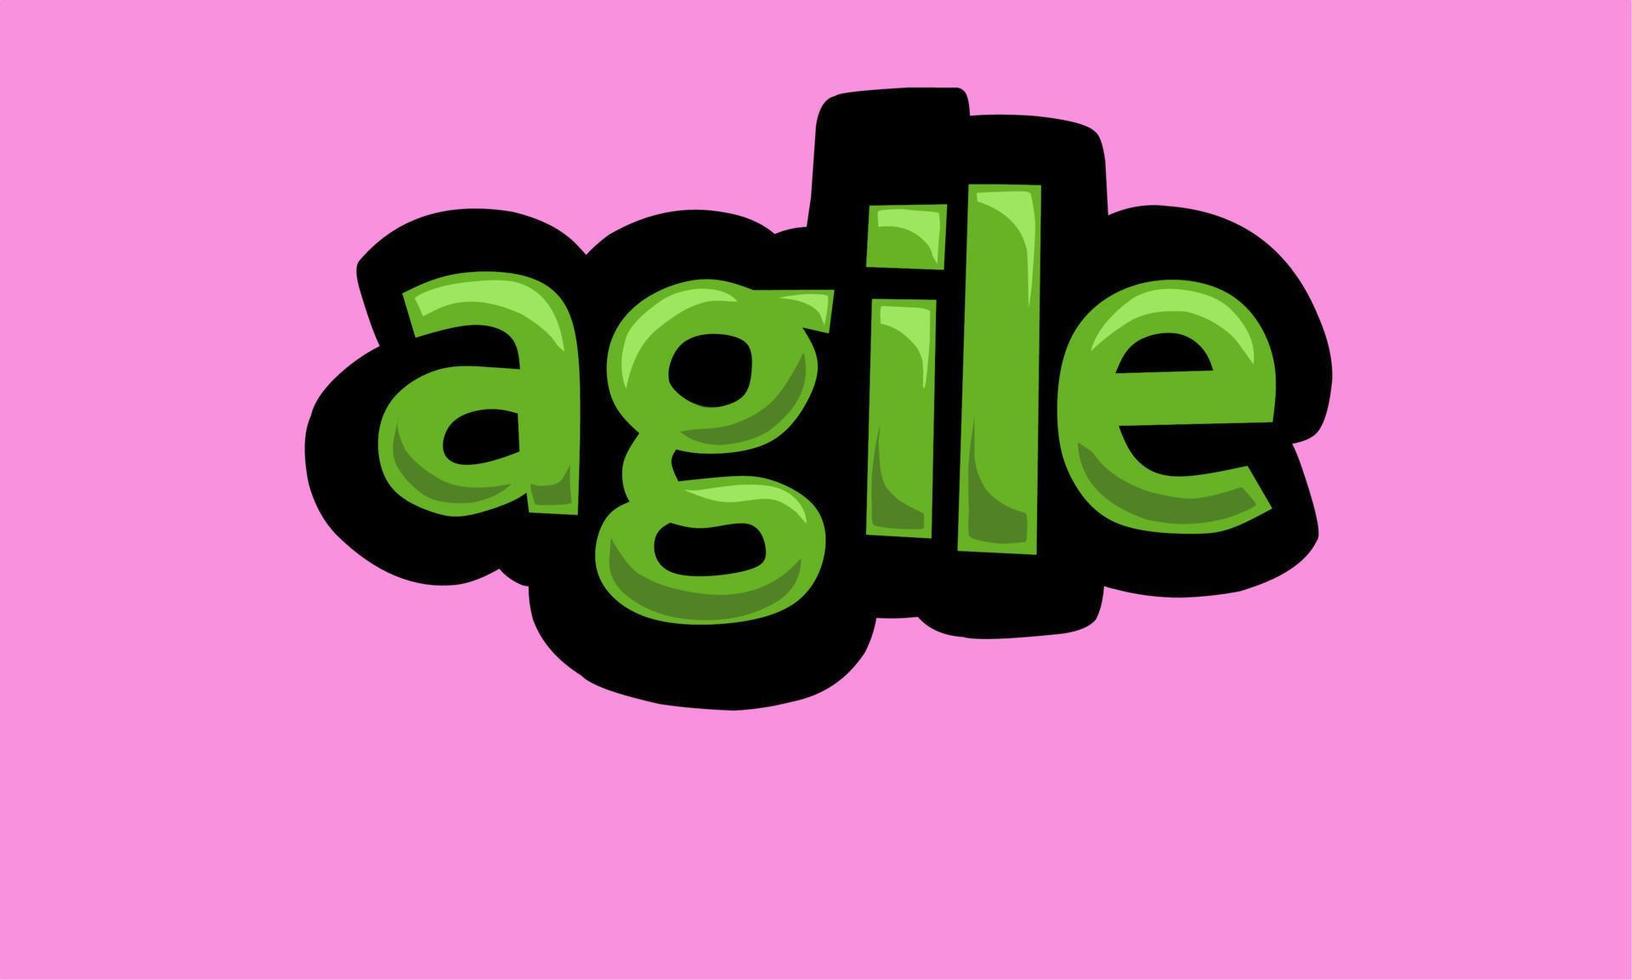 AGILE writing vector design on a pink background